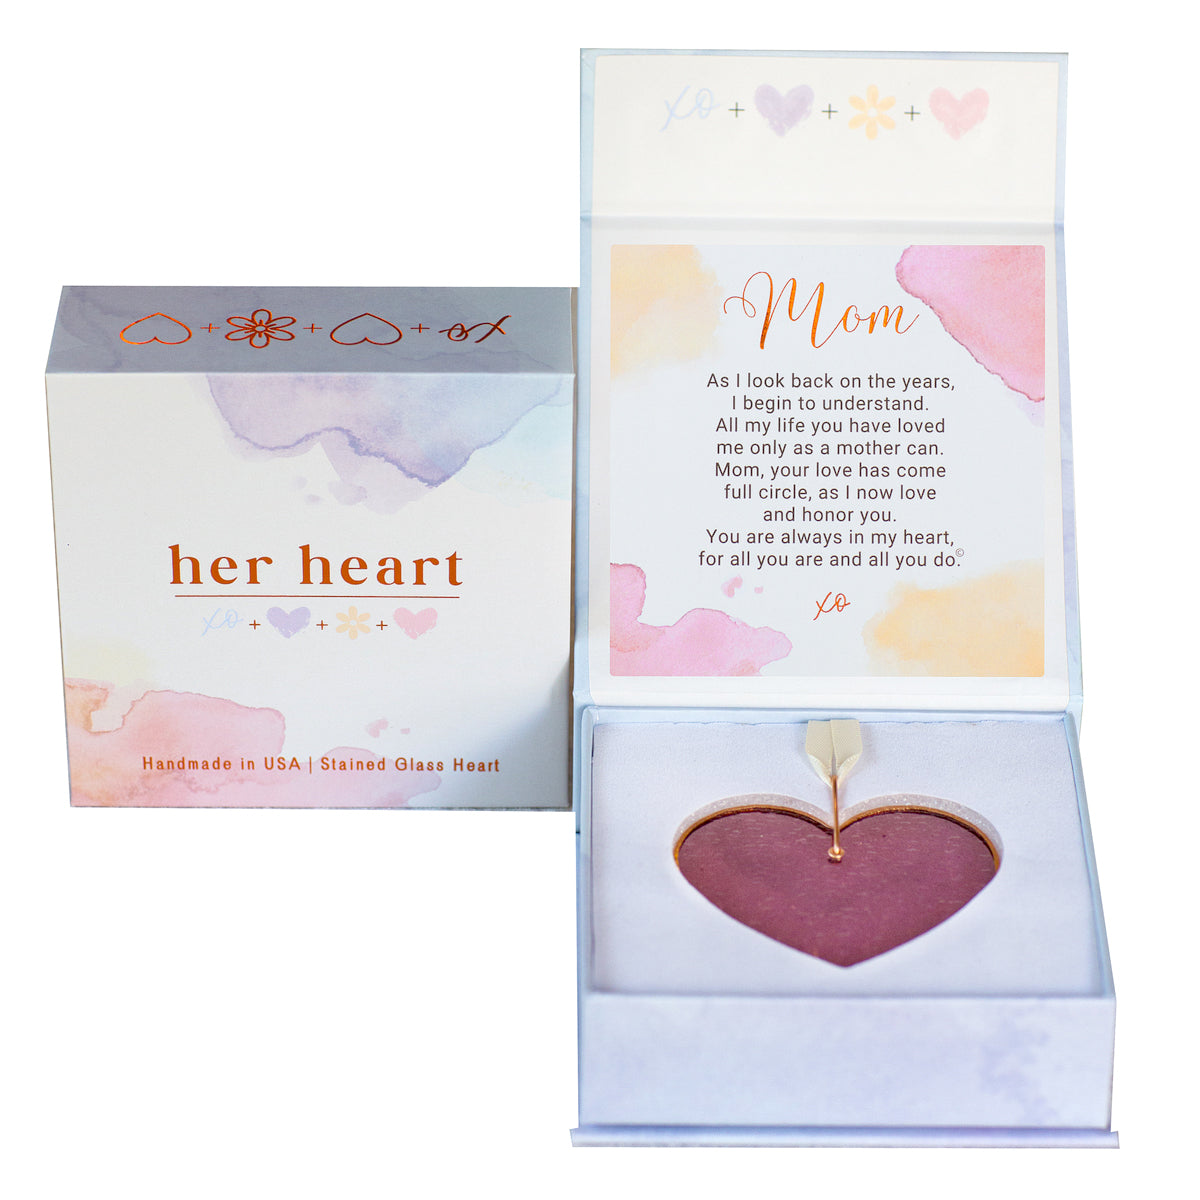 Her Heart for Mom gift box shown closed and open.  Open box features sentiment card and heart resting in foam cushion.